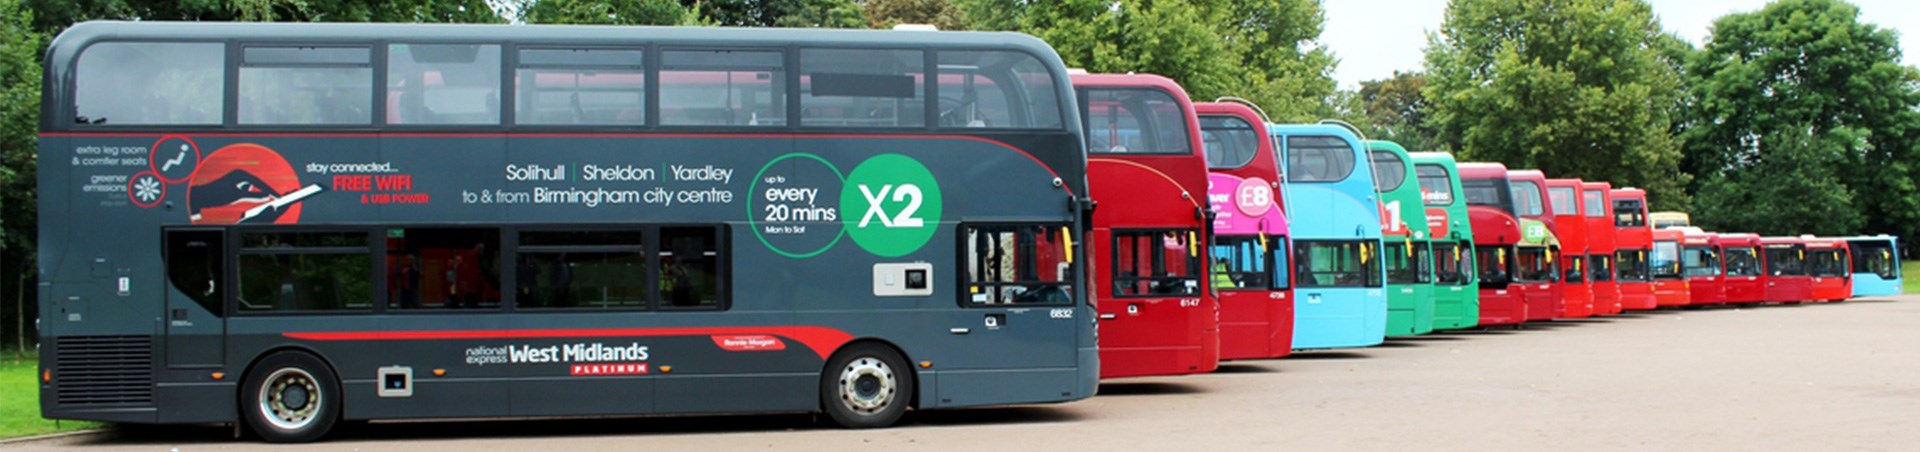 travel west midlands bus and metro day saver